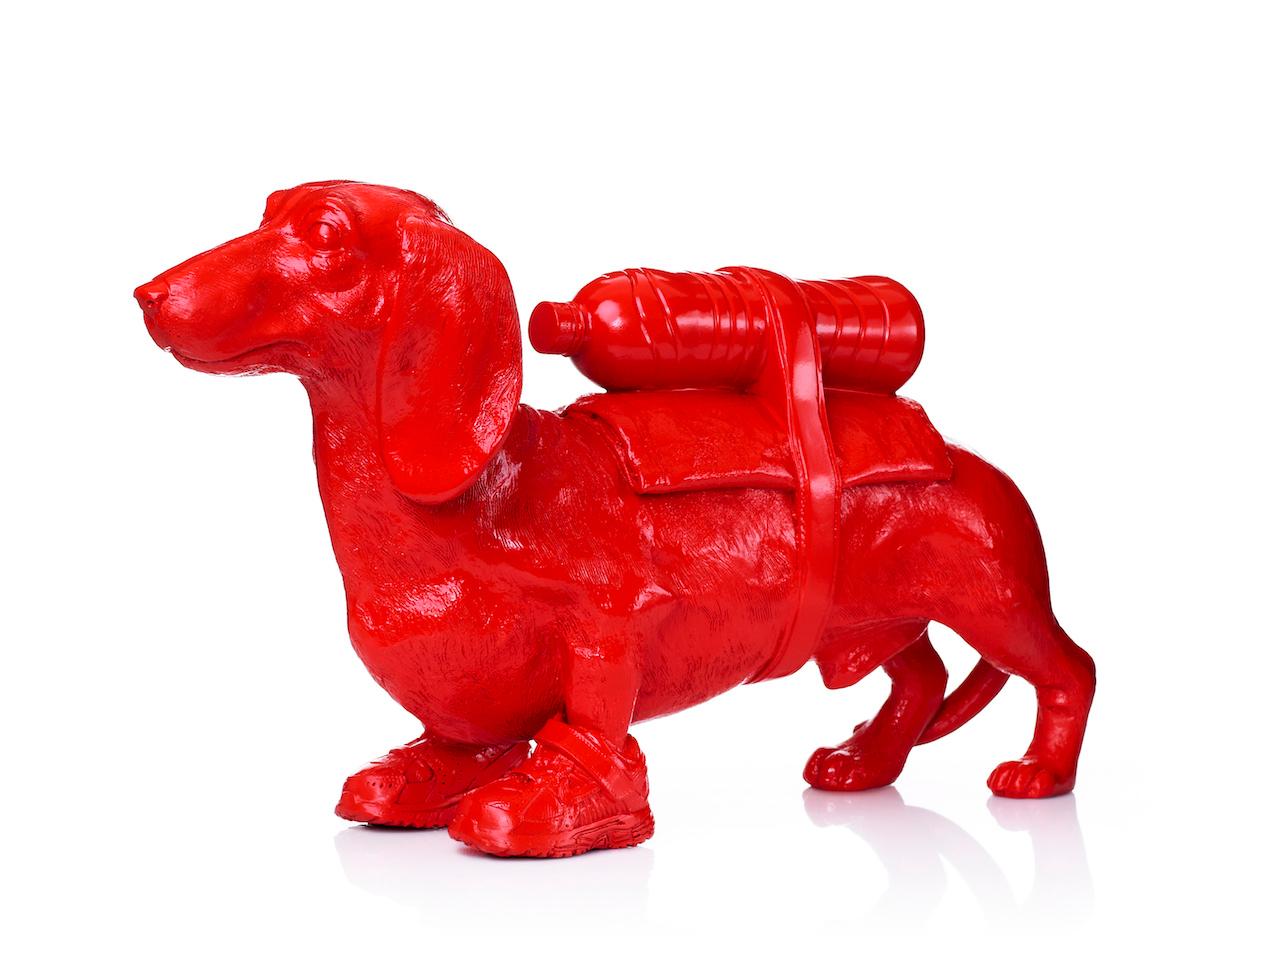 Cloned Dachshund with pet bottle.  - Sculpture by William Sweetlove